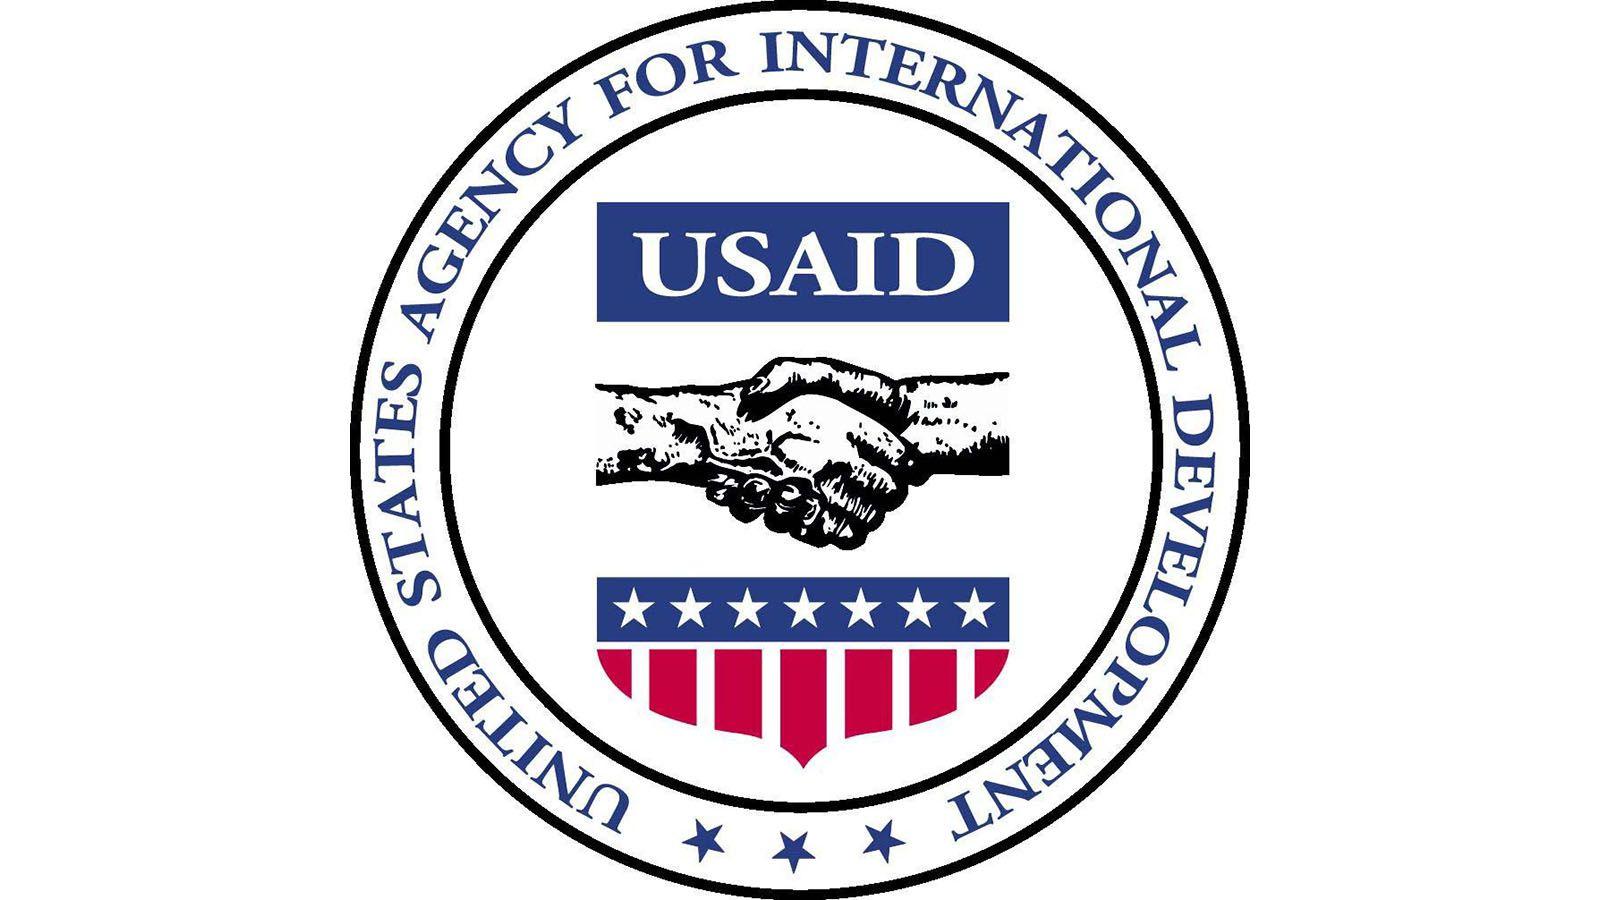 USAID Logo - USAID Nominee Pledges Support for LGBTQ Human Rights | Human Rights ...